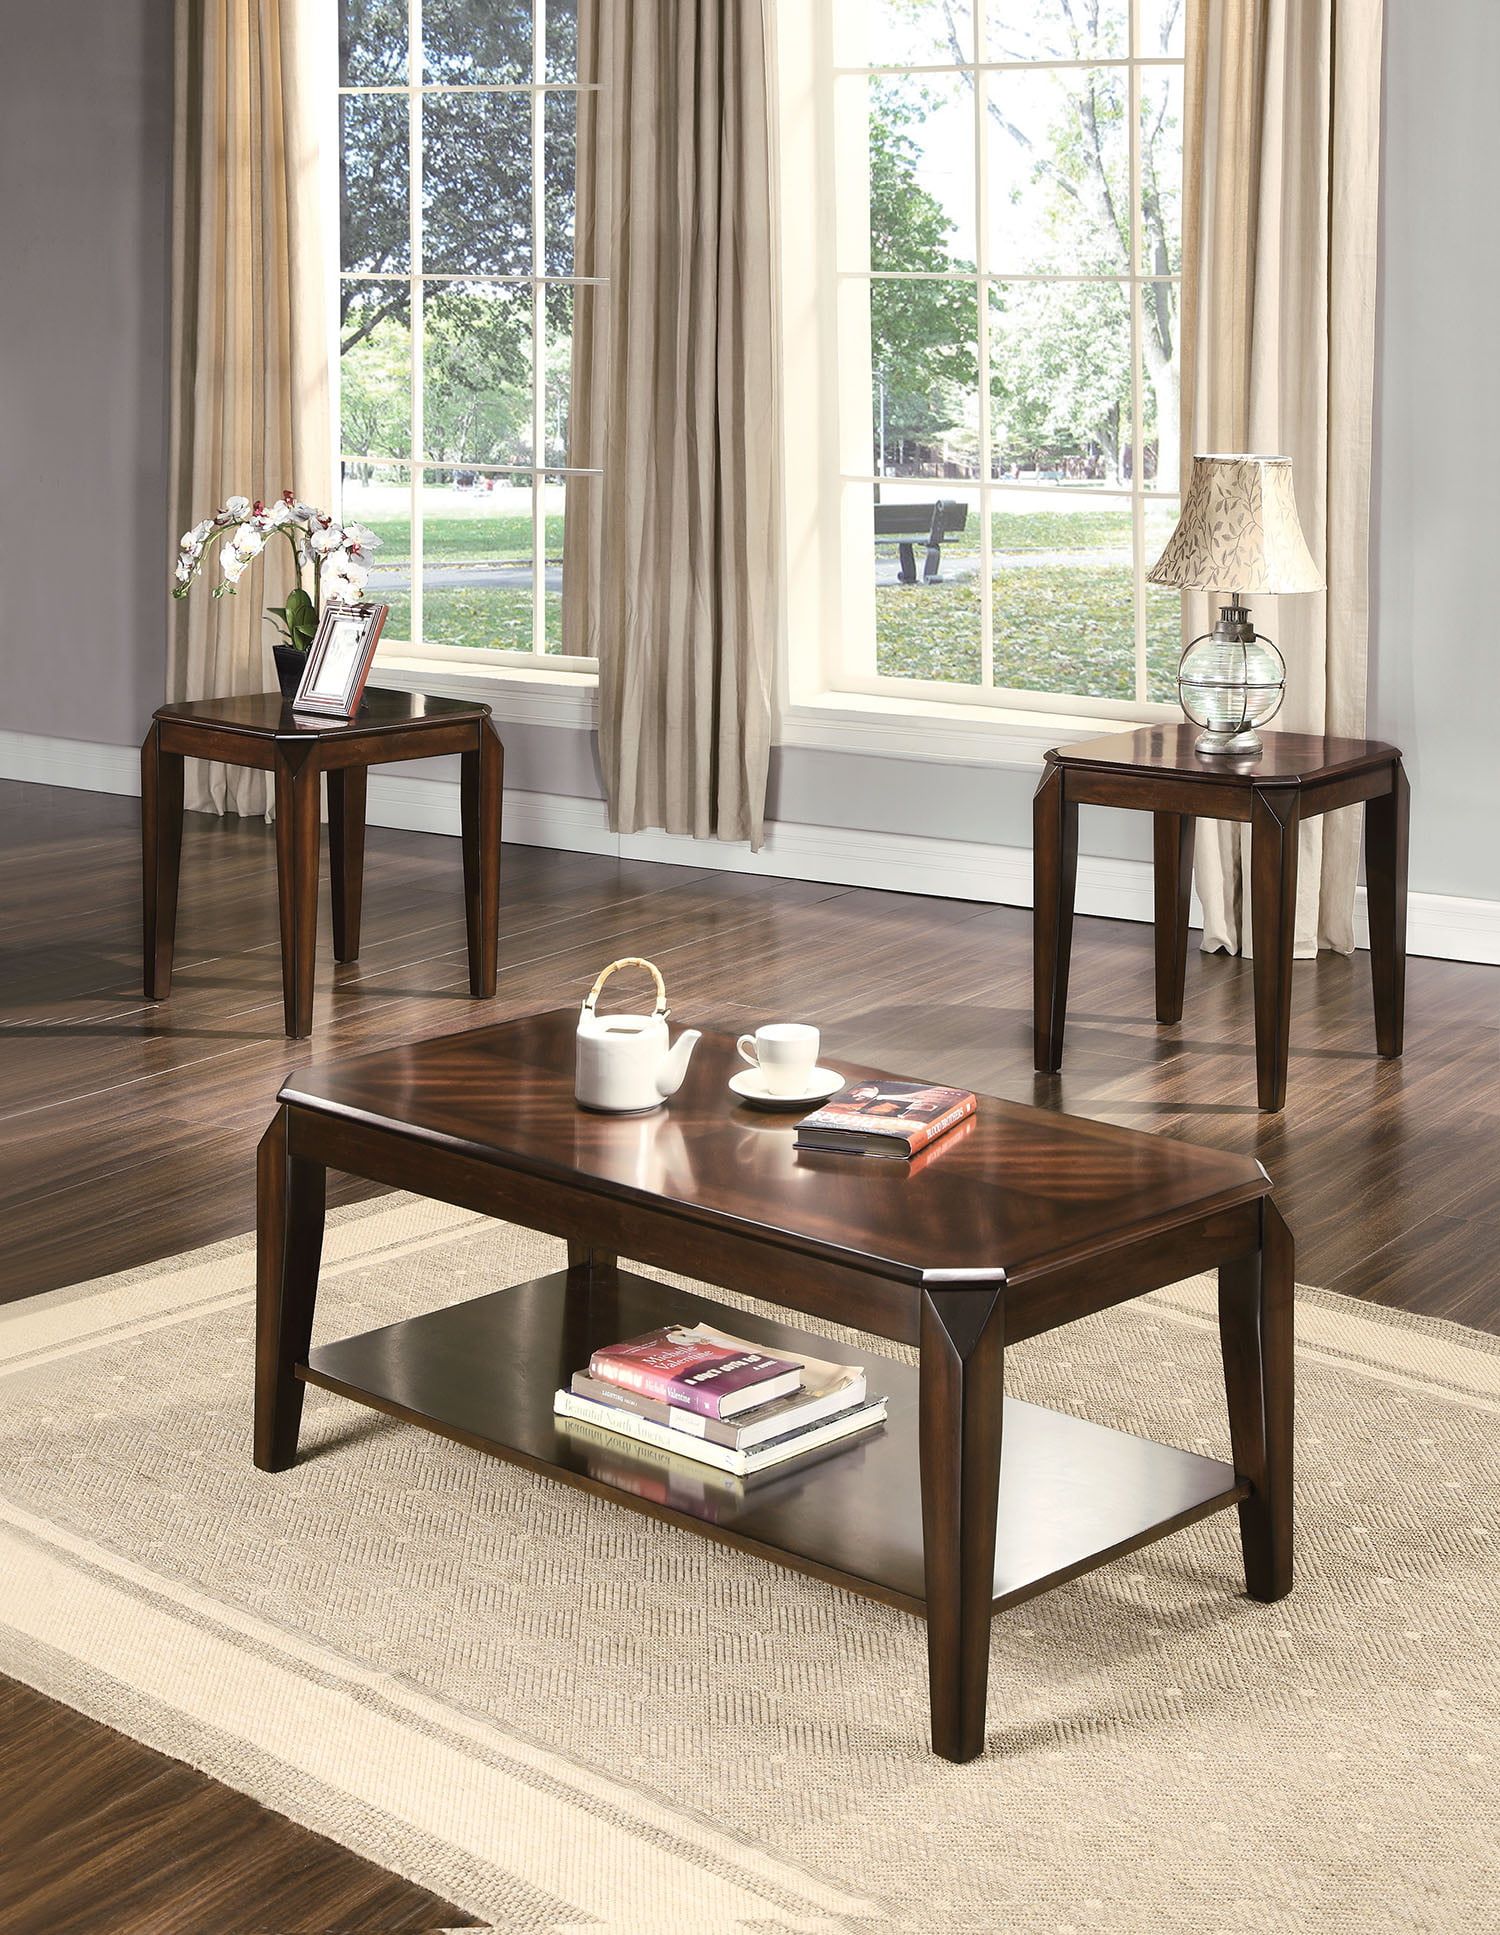 3pc Pack Coffee/end Table Set, Walnut – Poplar Wood, Basswood Ven Throughout Coffee Tables For 4 6 People (View 15 of 20)